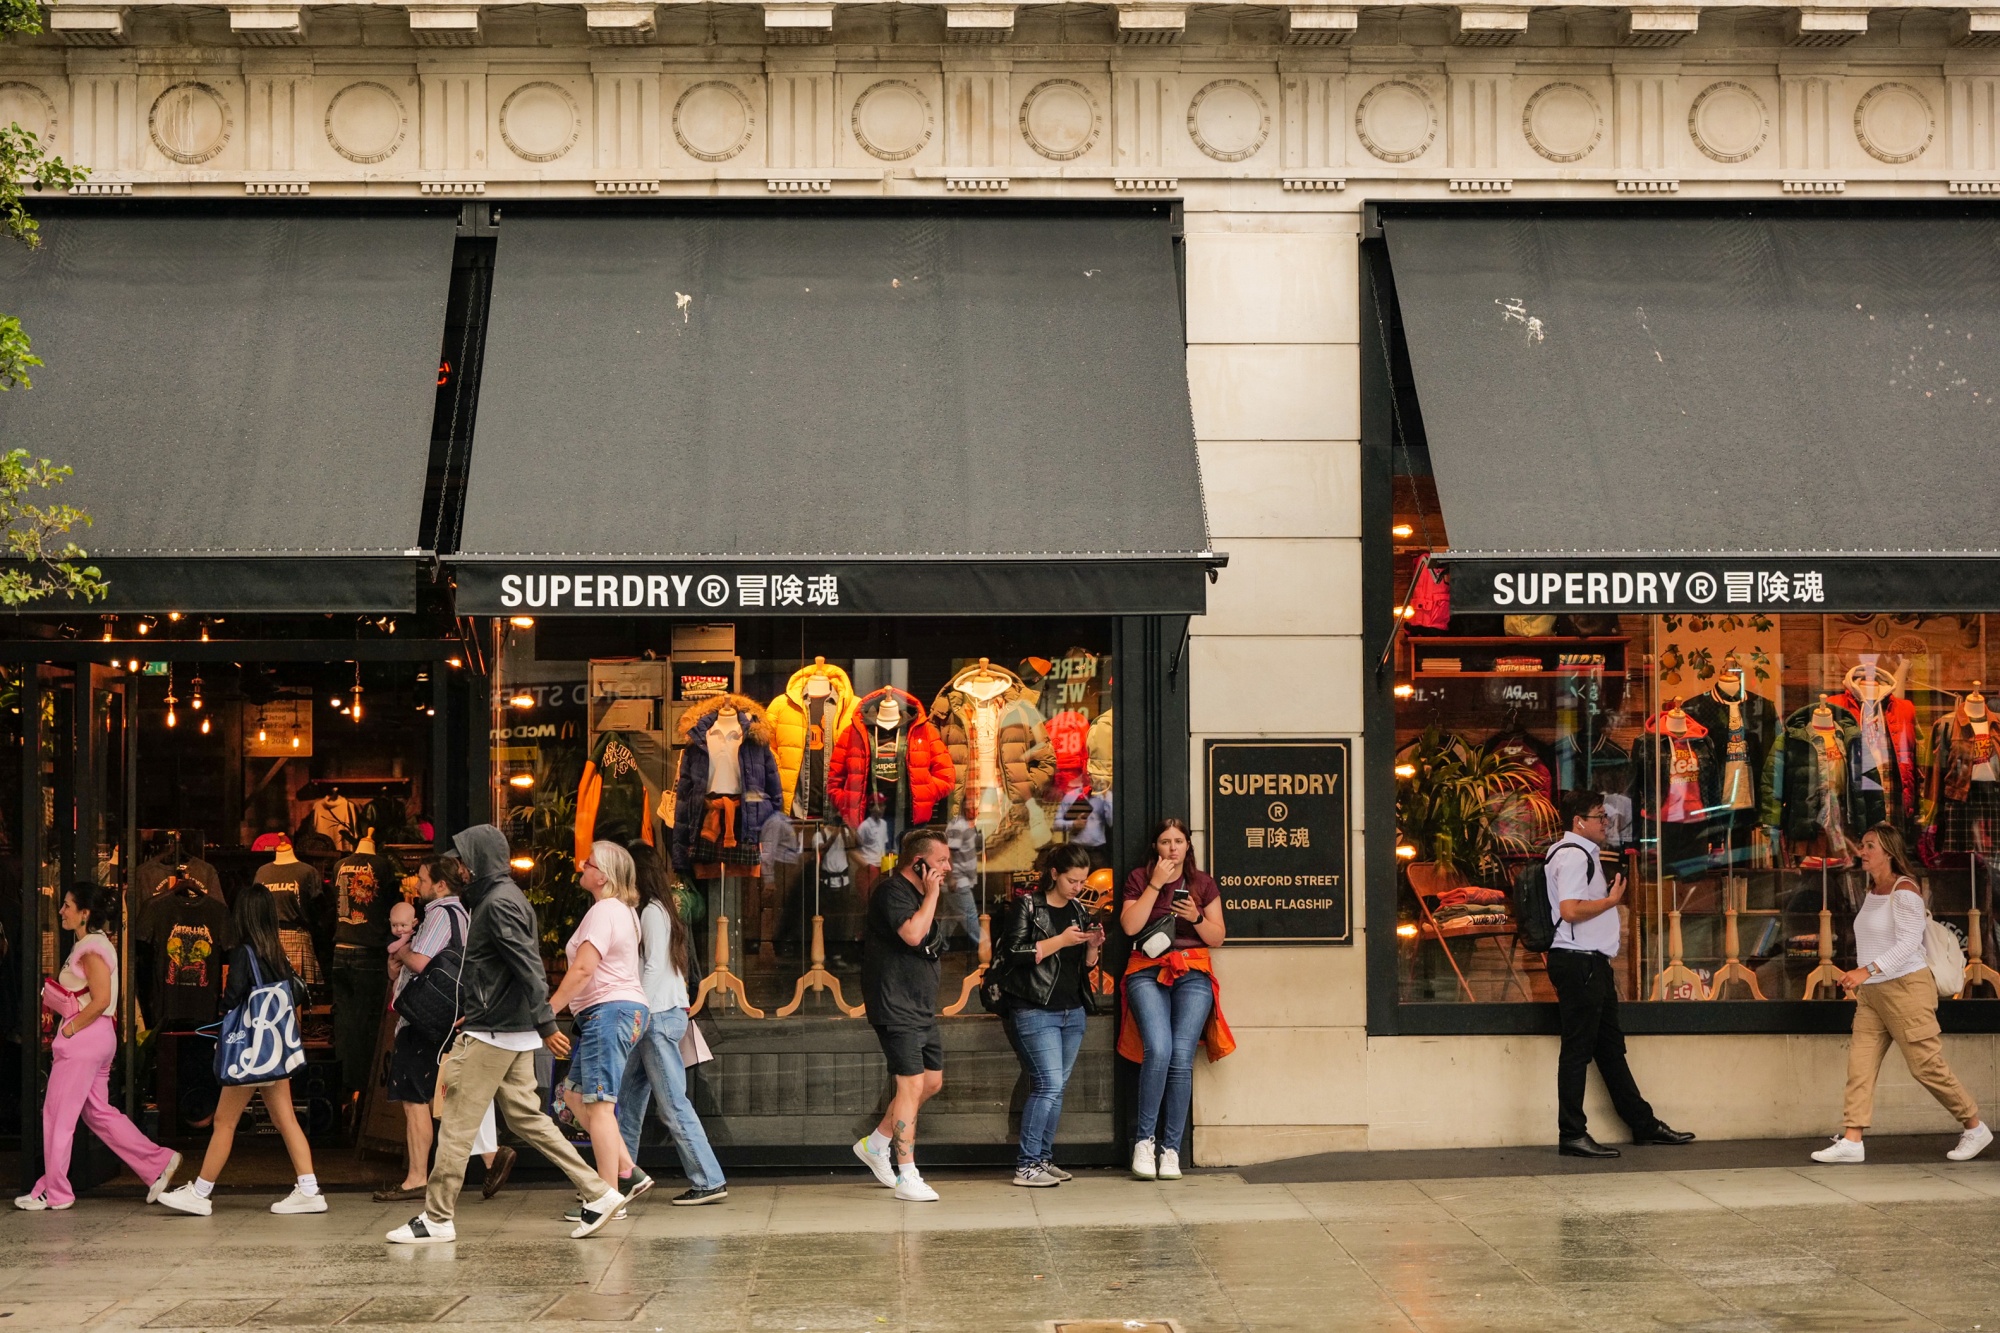 Superdry Sinks to £22 Million Loss as Turnaround Flounders - Bloomberg